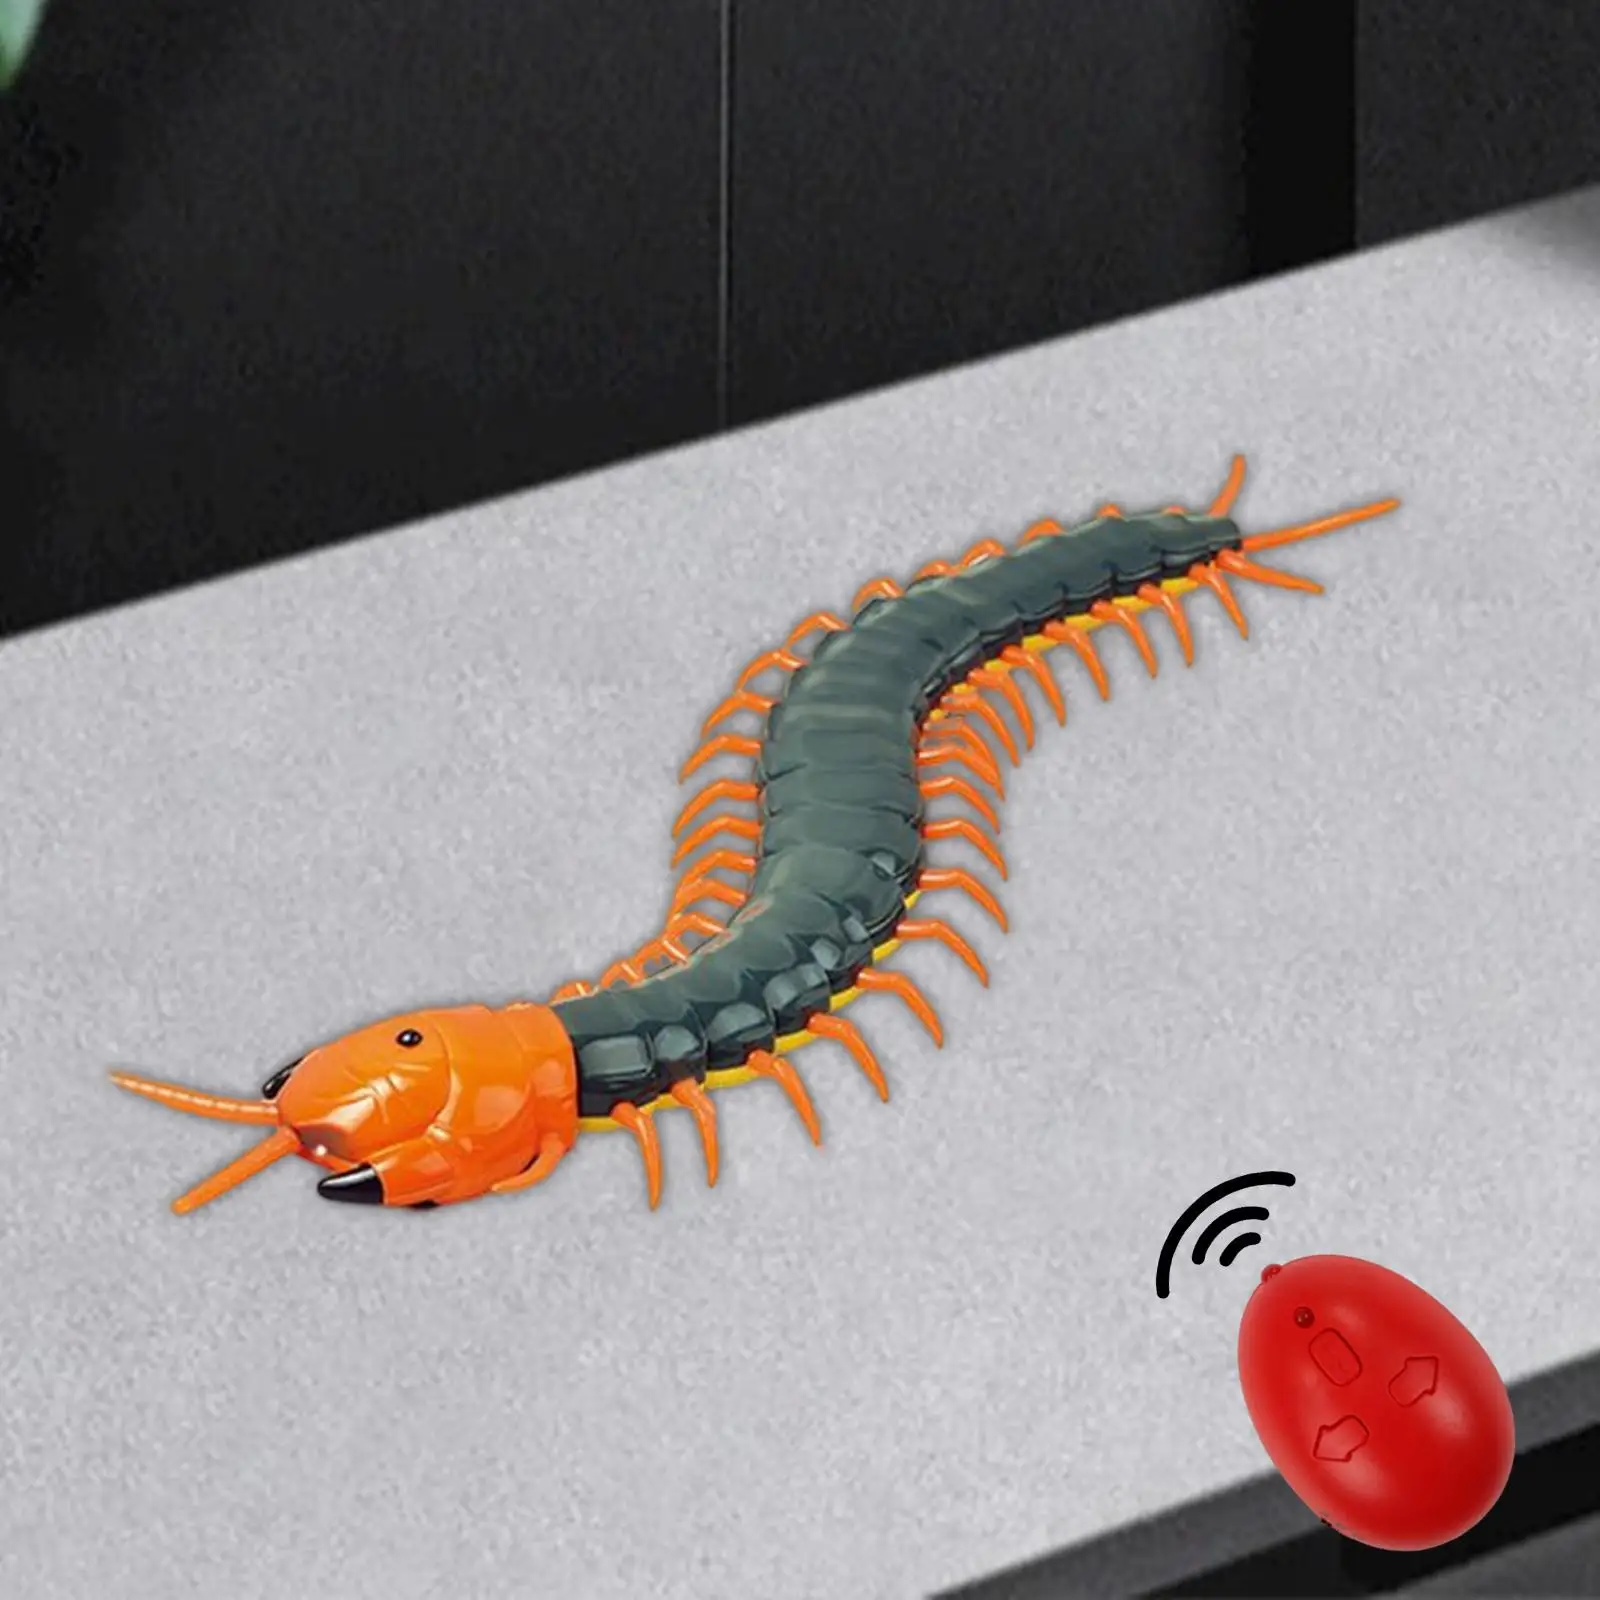 Electric Centipede Toy Tricky Props Centipede Toys Electric Toys ChildrenS Remote Control Centipede for Dogs